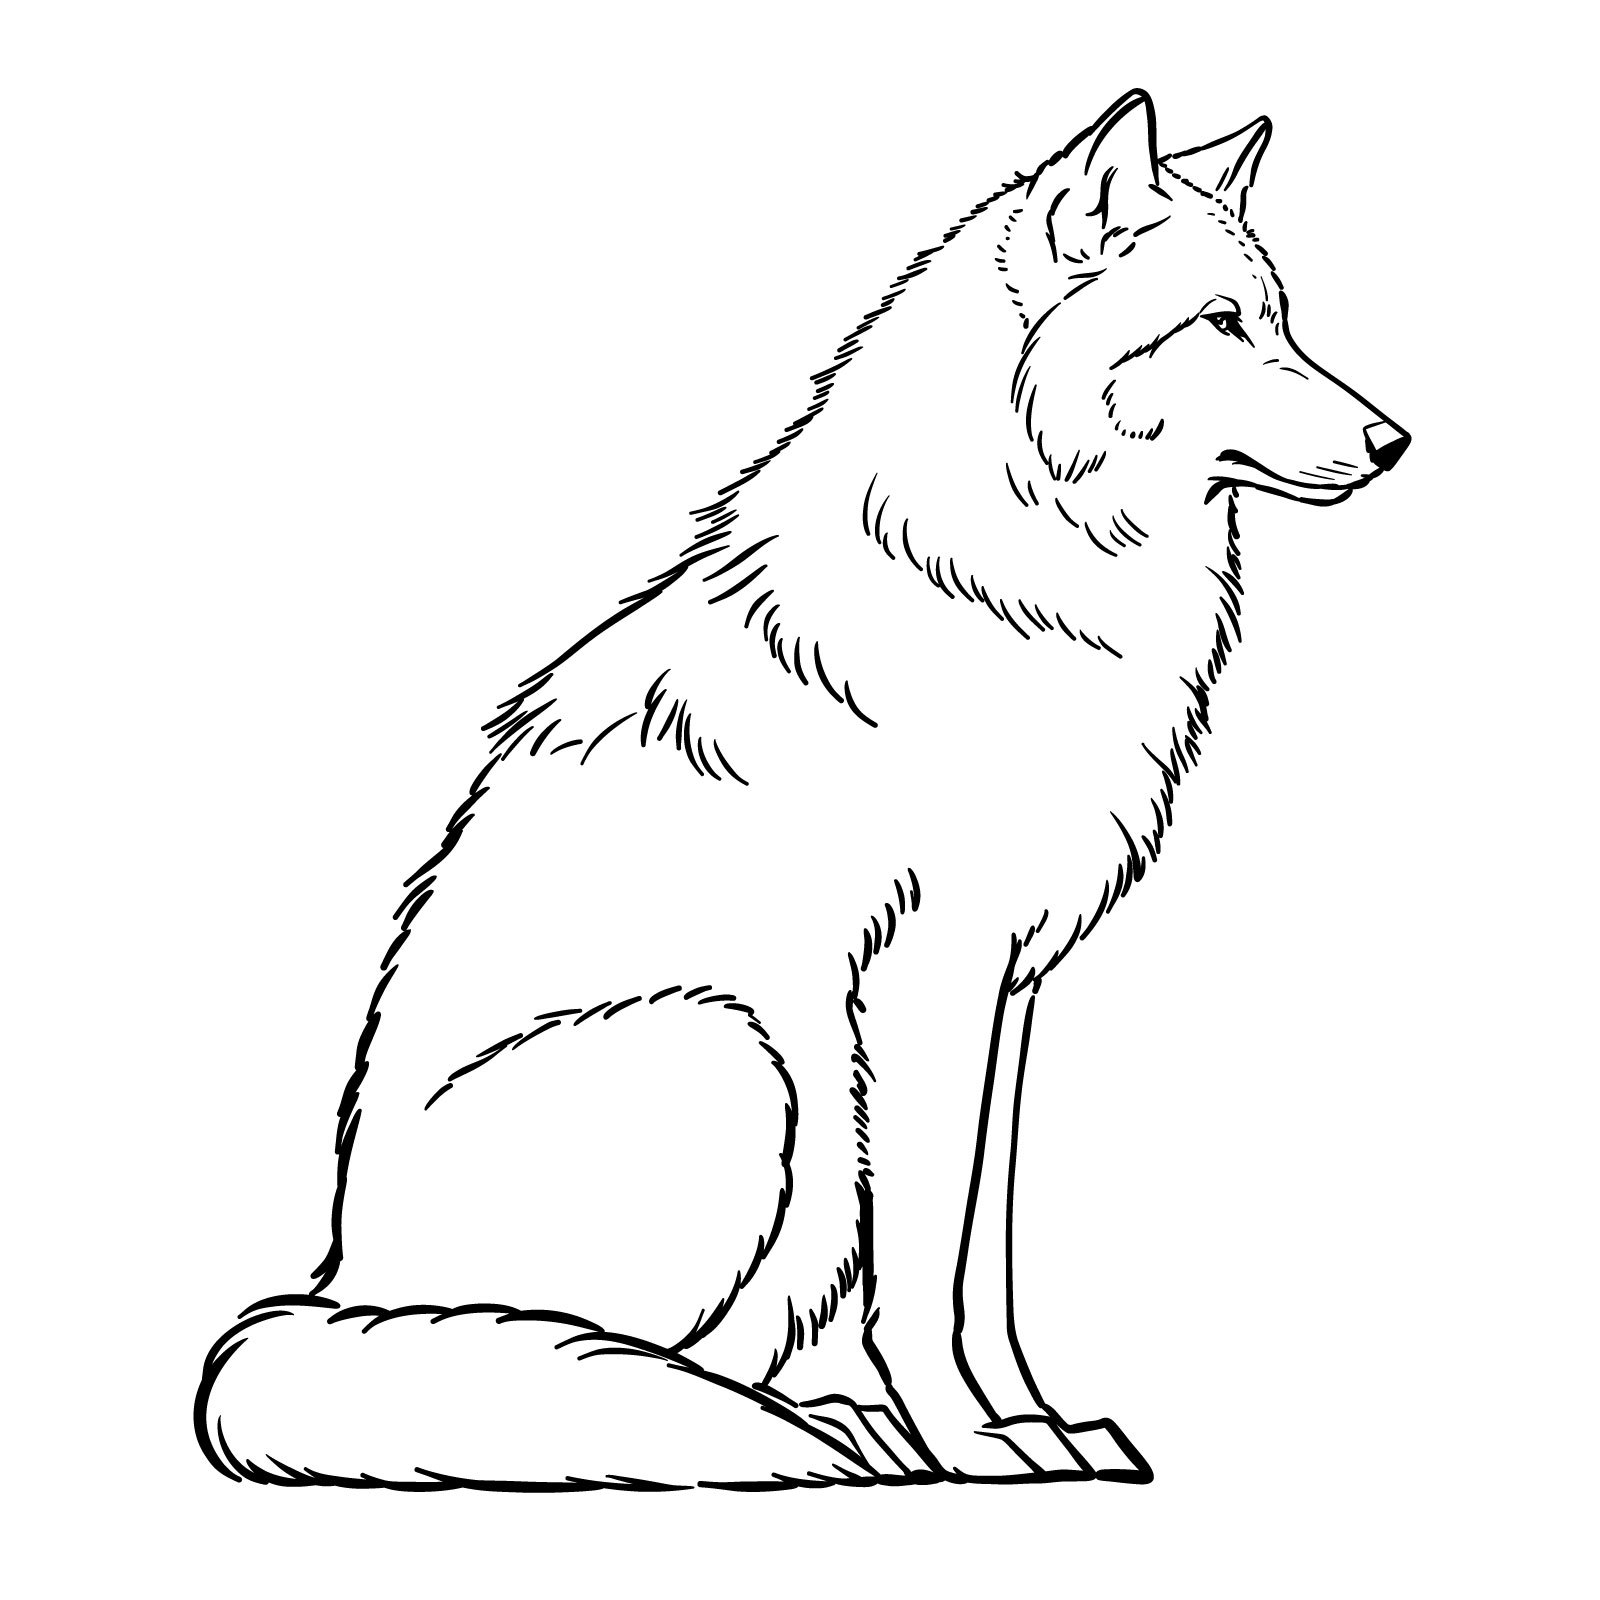 How to draw a sitting wolf side view - a step-by-step guide